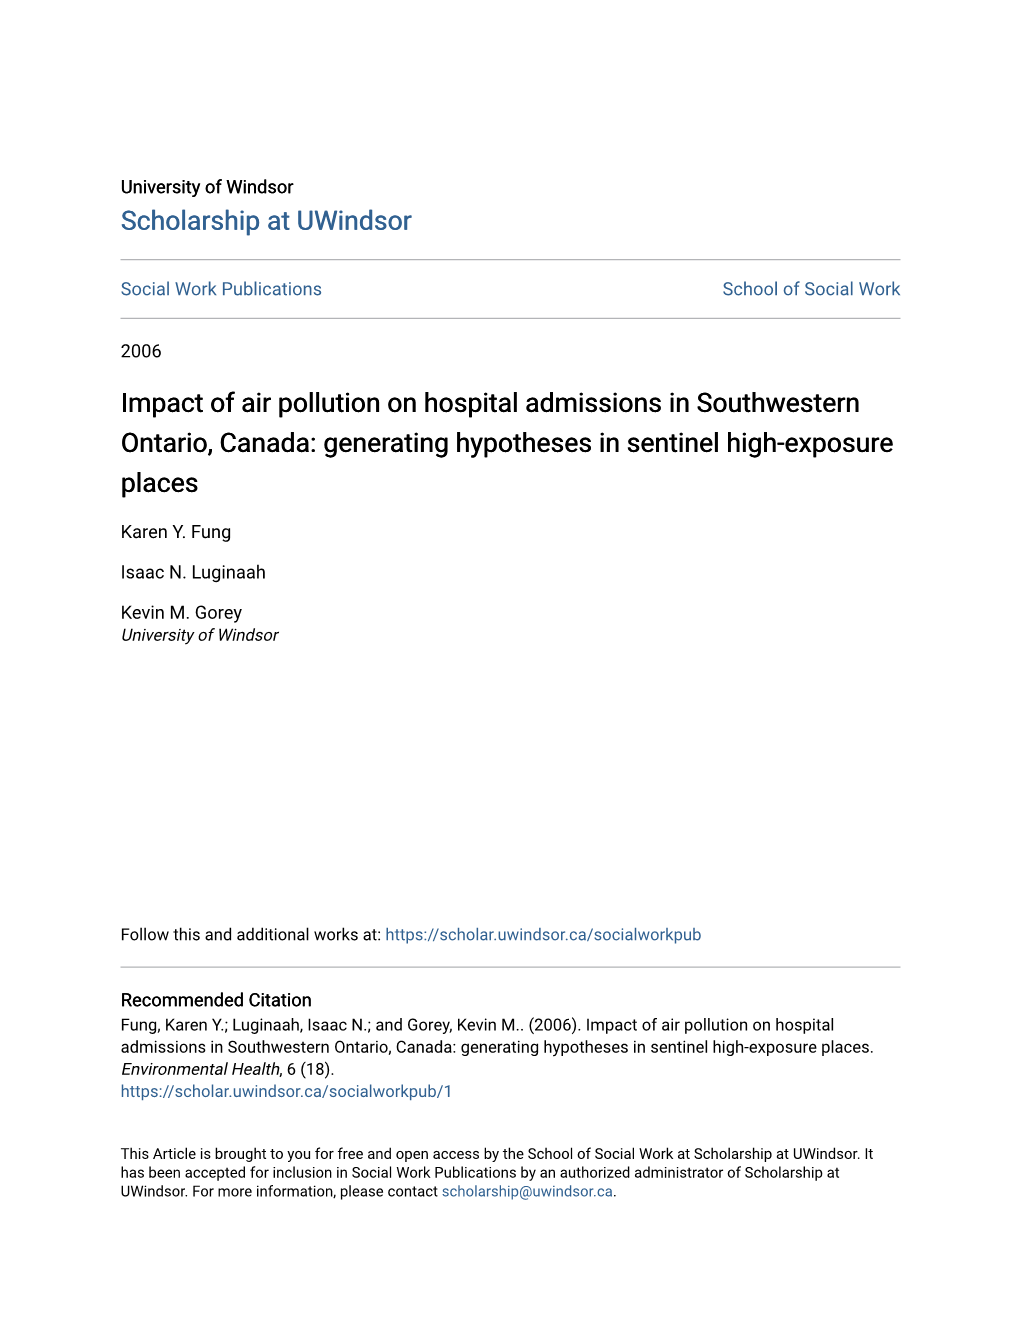 Impact of Air Pollution on Hospital Admissions in Southwestern Ontario, Canada: Generating Hypotheses in Sentinel High-Exposure Places